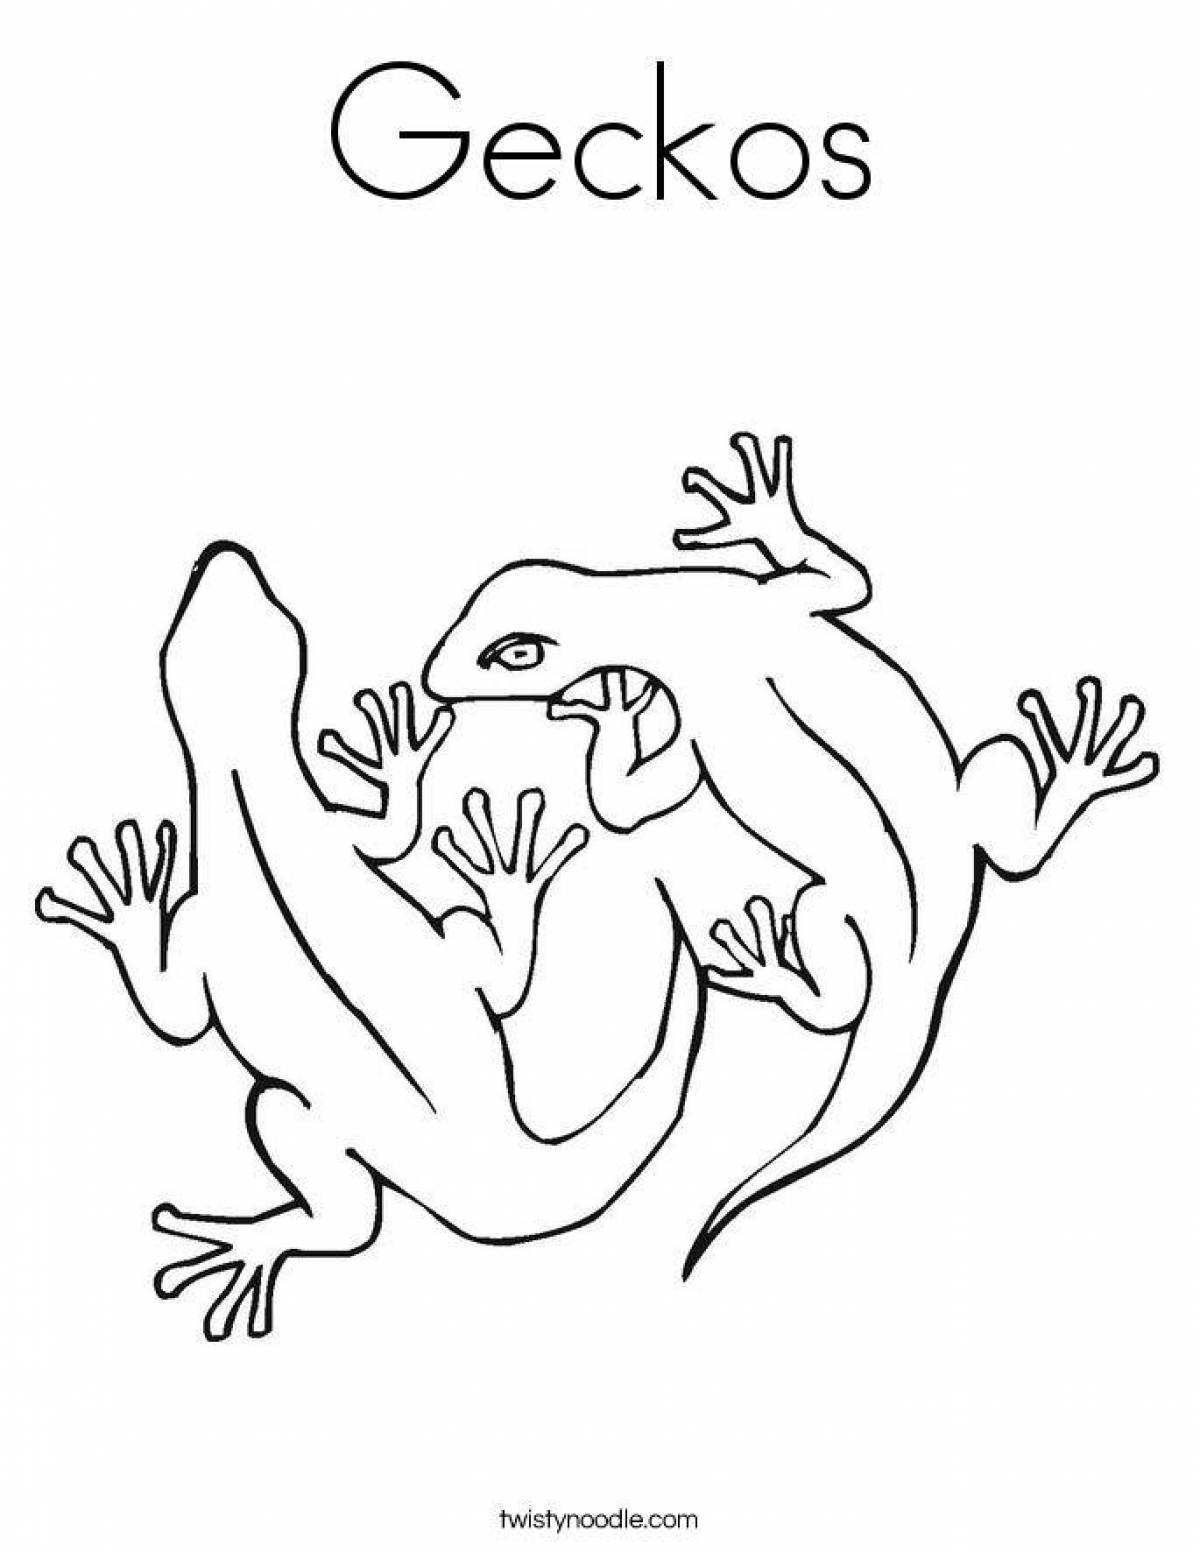 Magic gecko coloring page